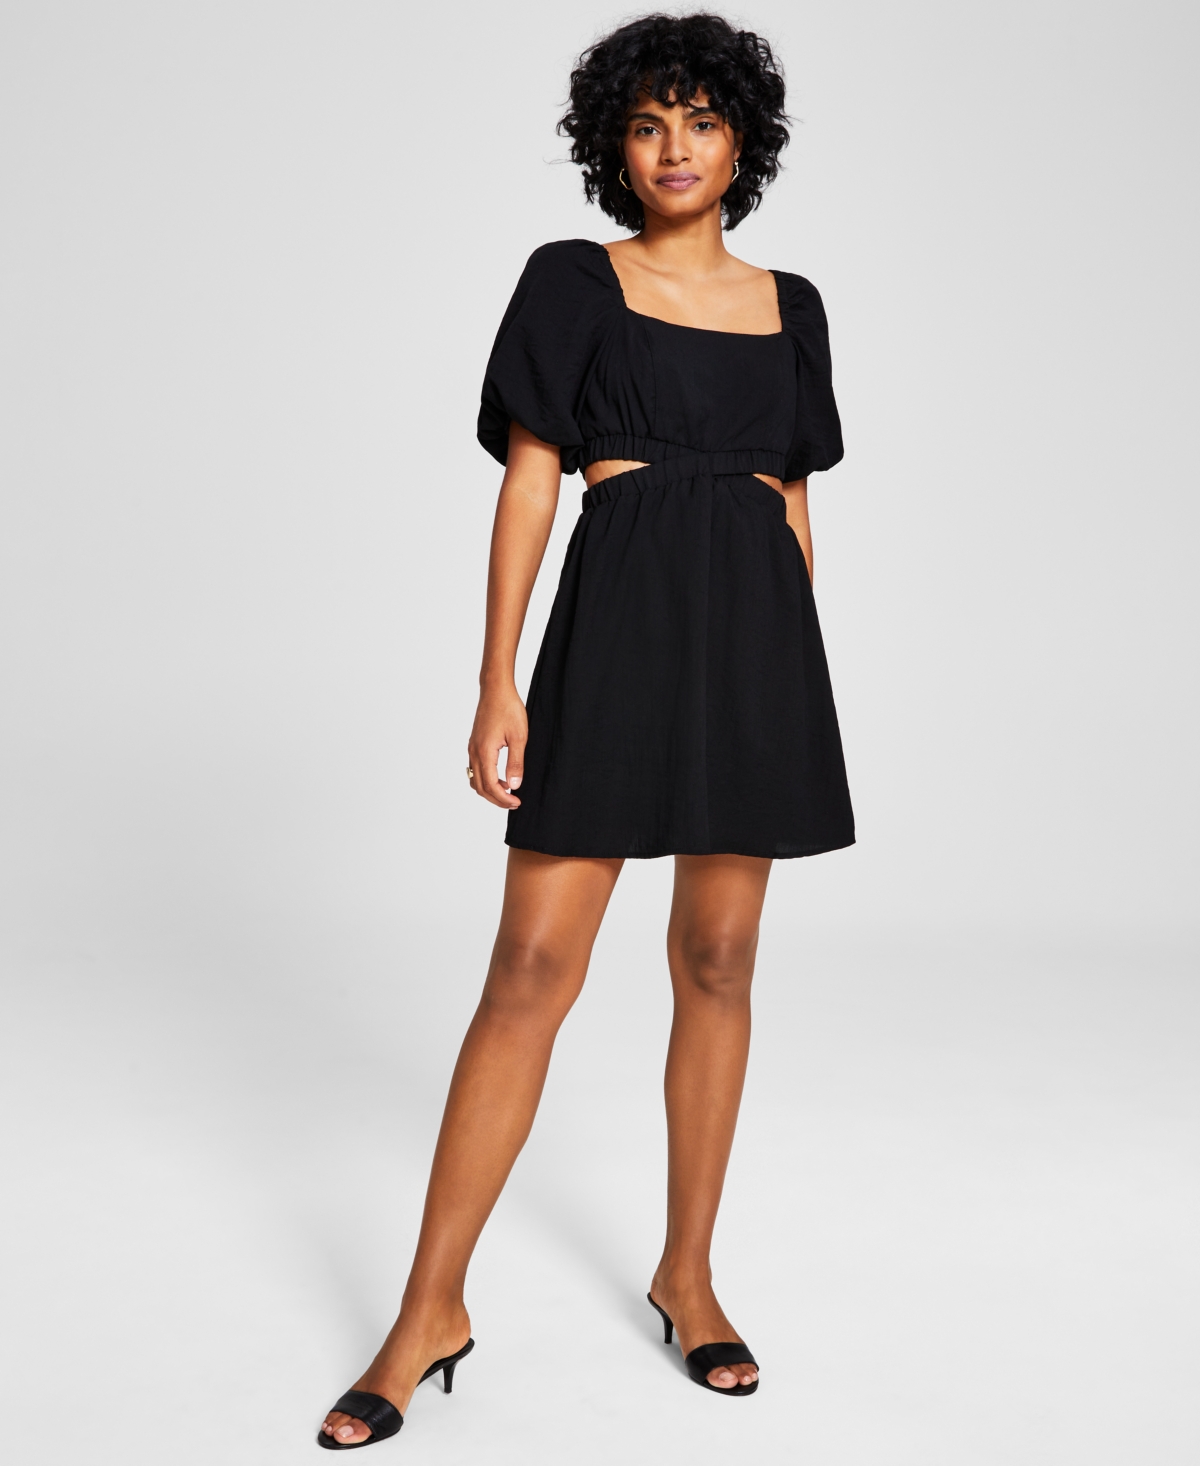 AND NOW THIS WOMEN'S PUFF-SLEEVE CUTOUT DRESS